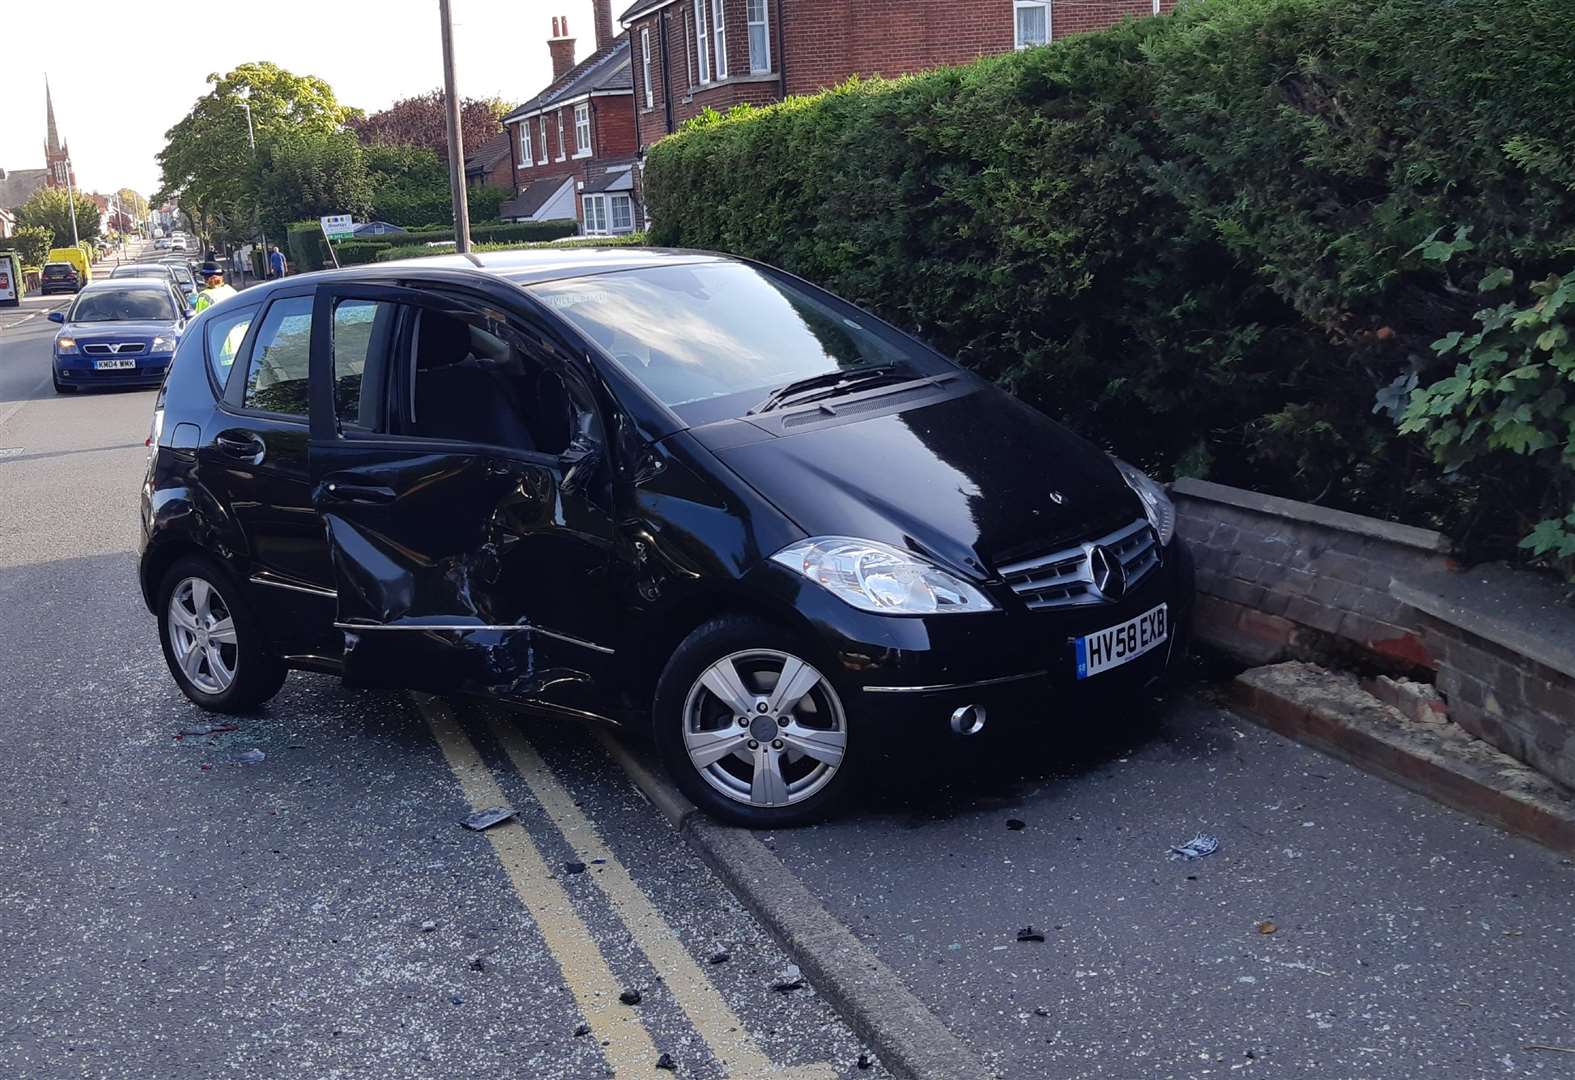 The black Mercedes collided with a bus on Dover Road